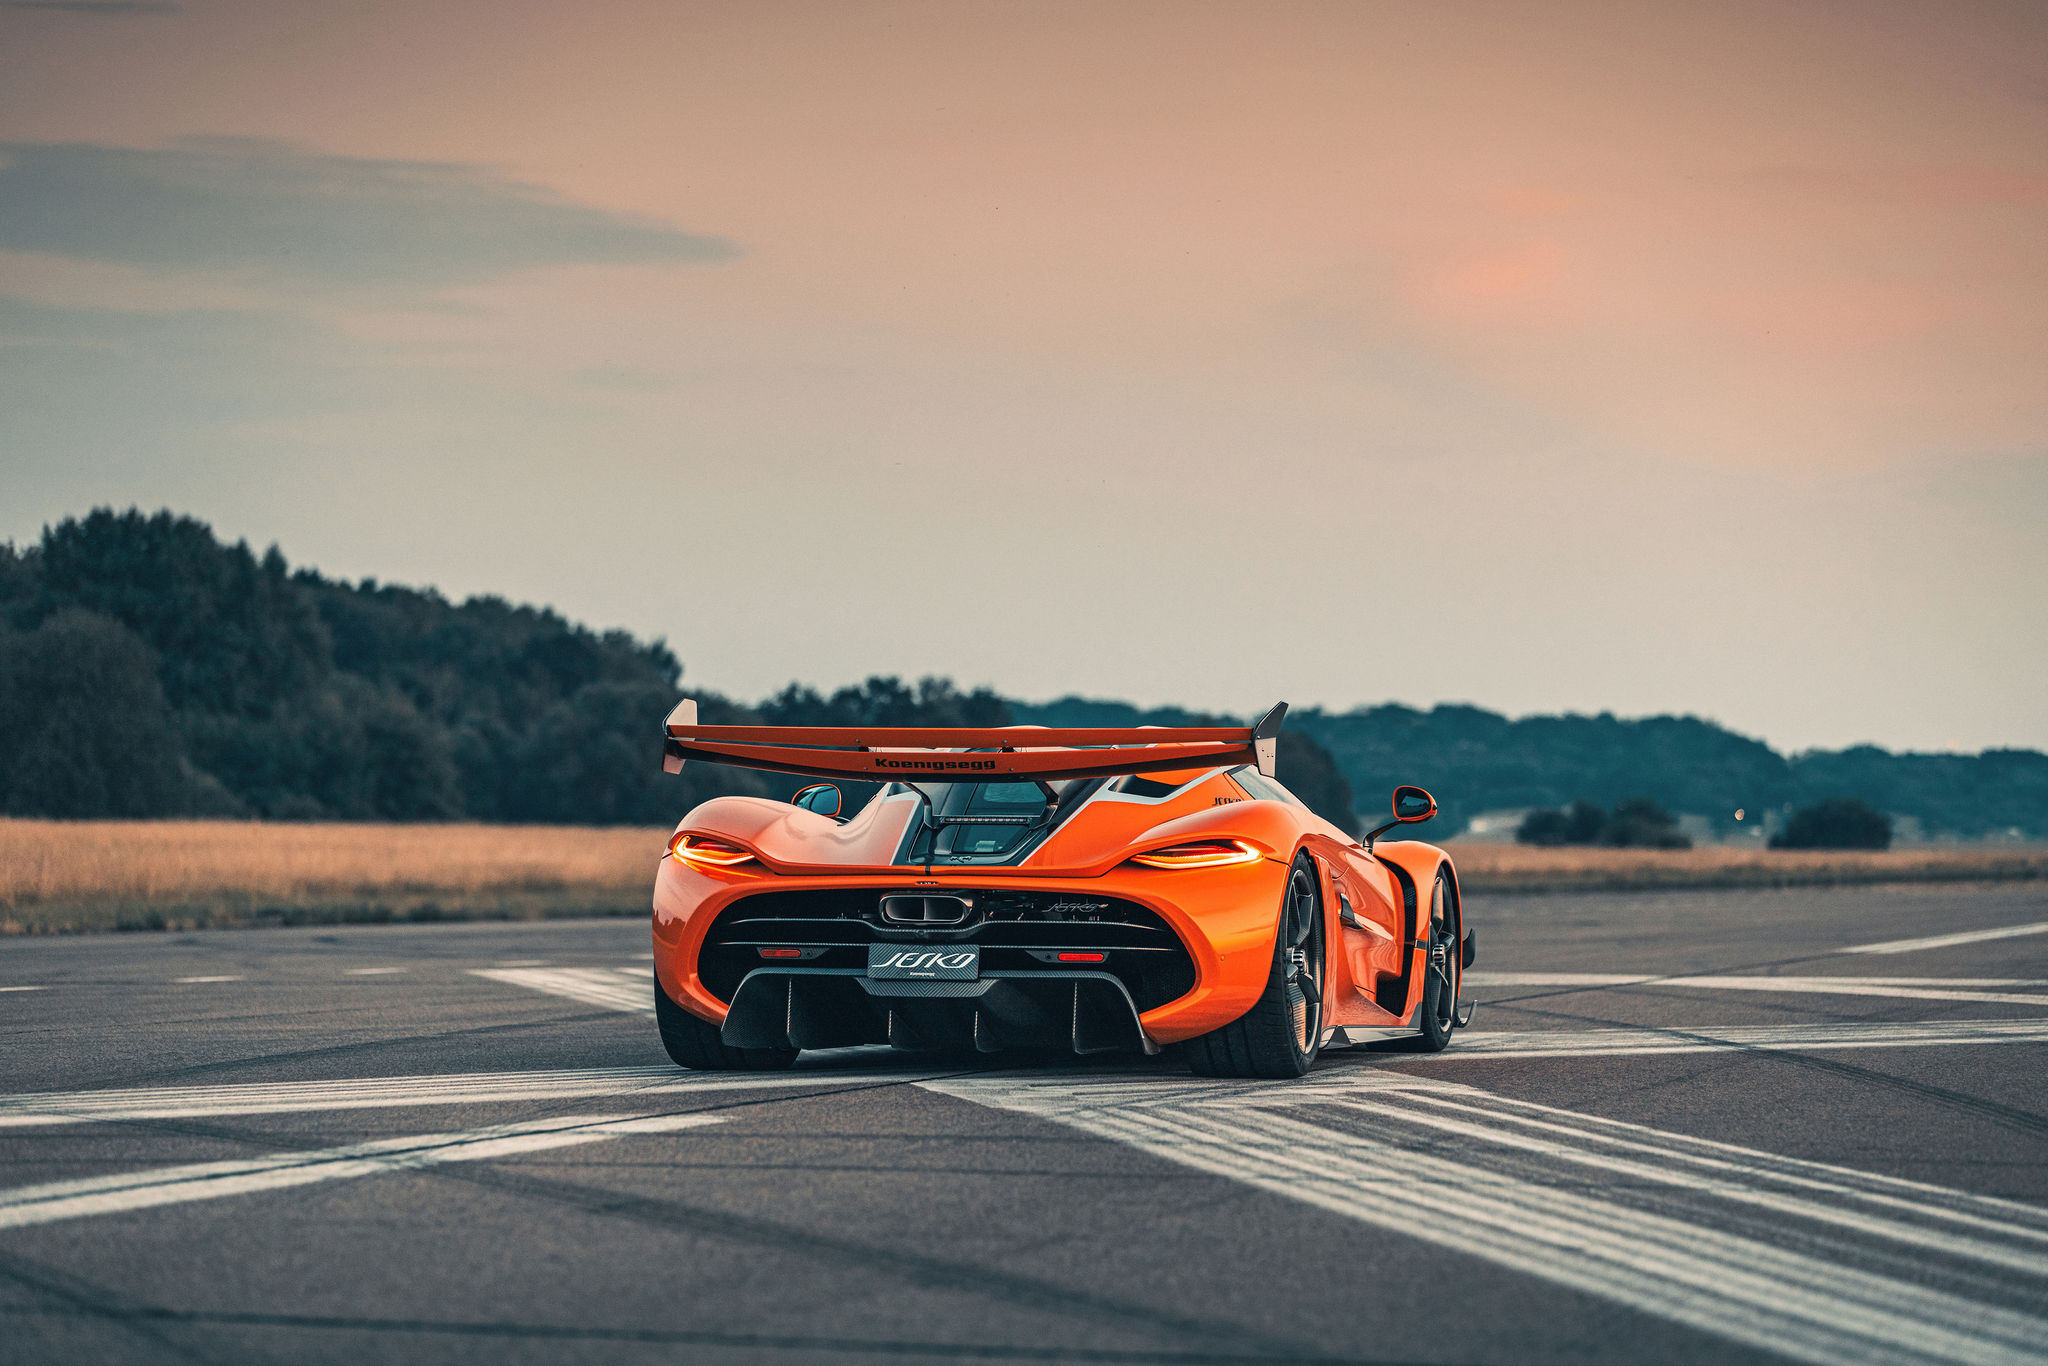 Koenigsegg Have Once Again Built The Fastest Car Ever Made